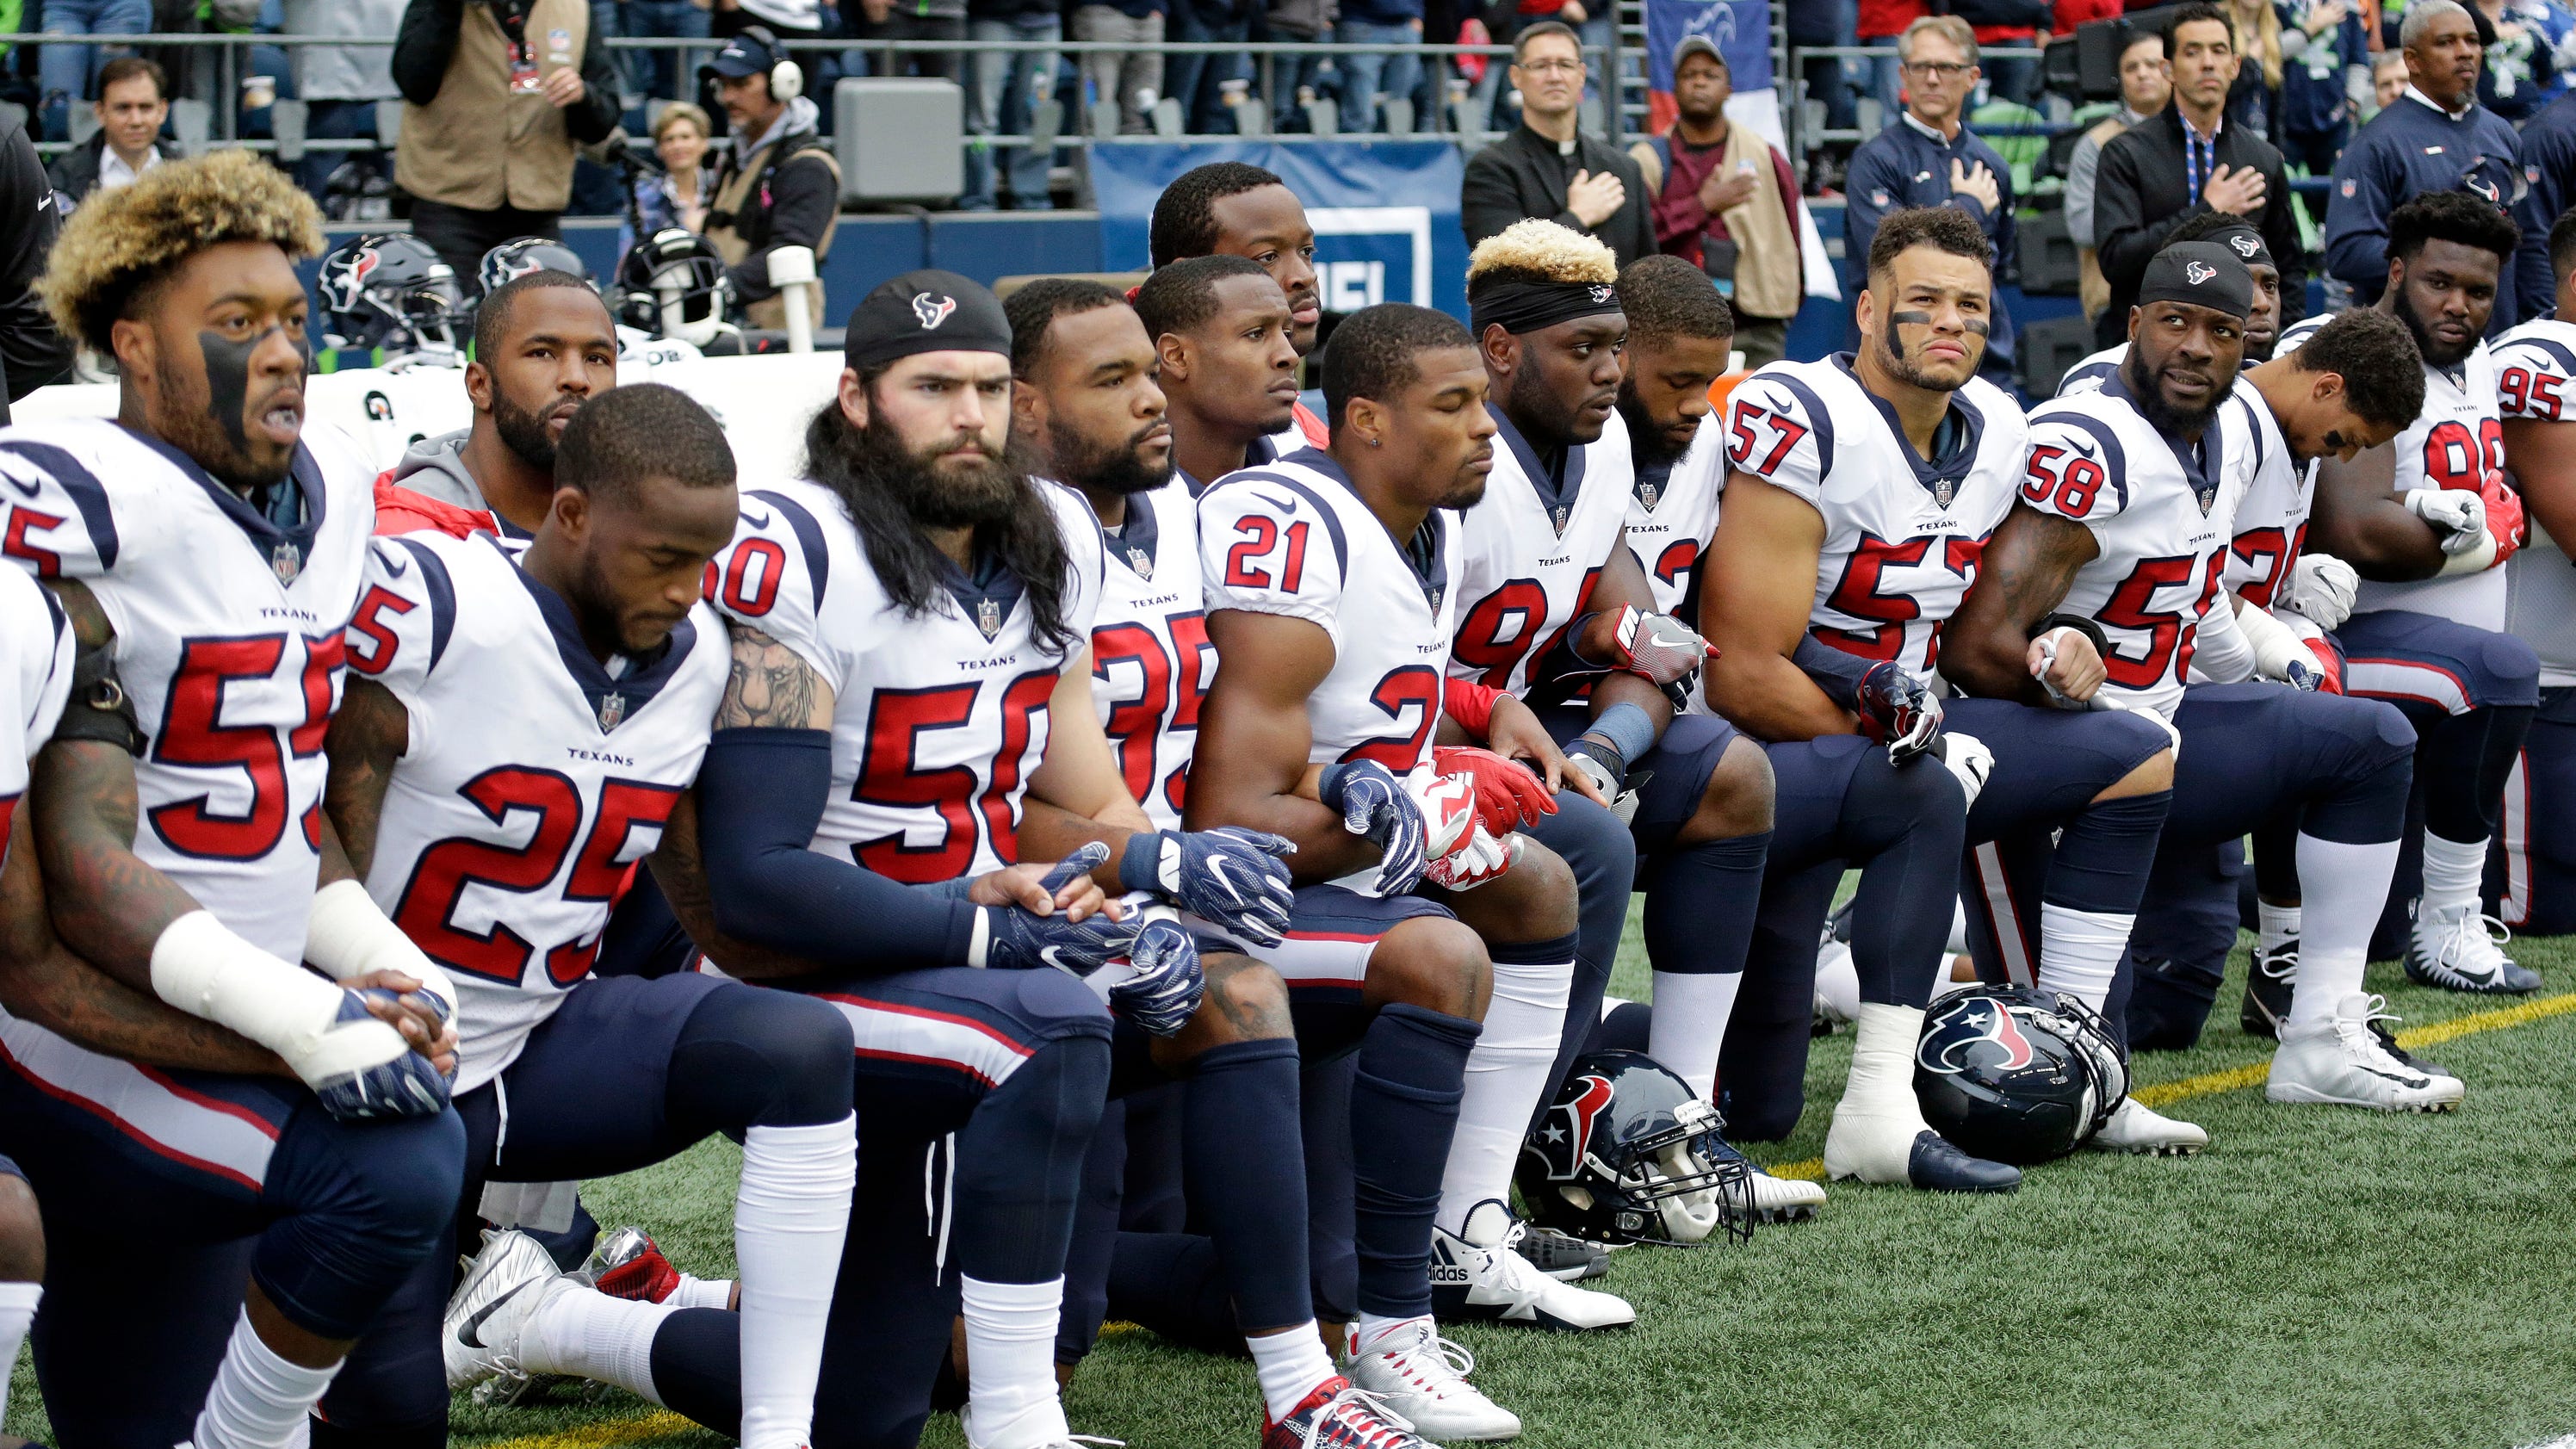 Most Texans Kneel During Anthem After Owners Comments 